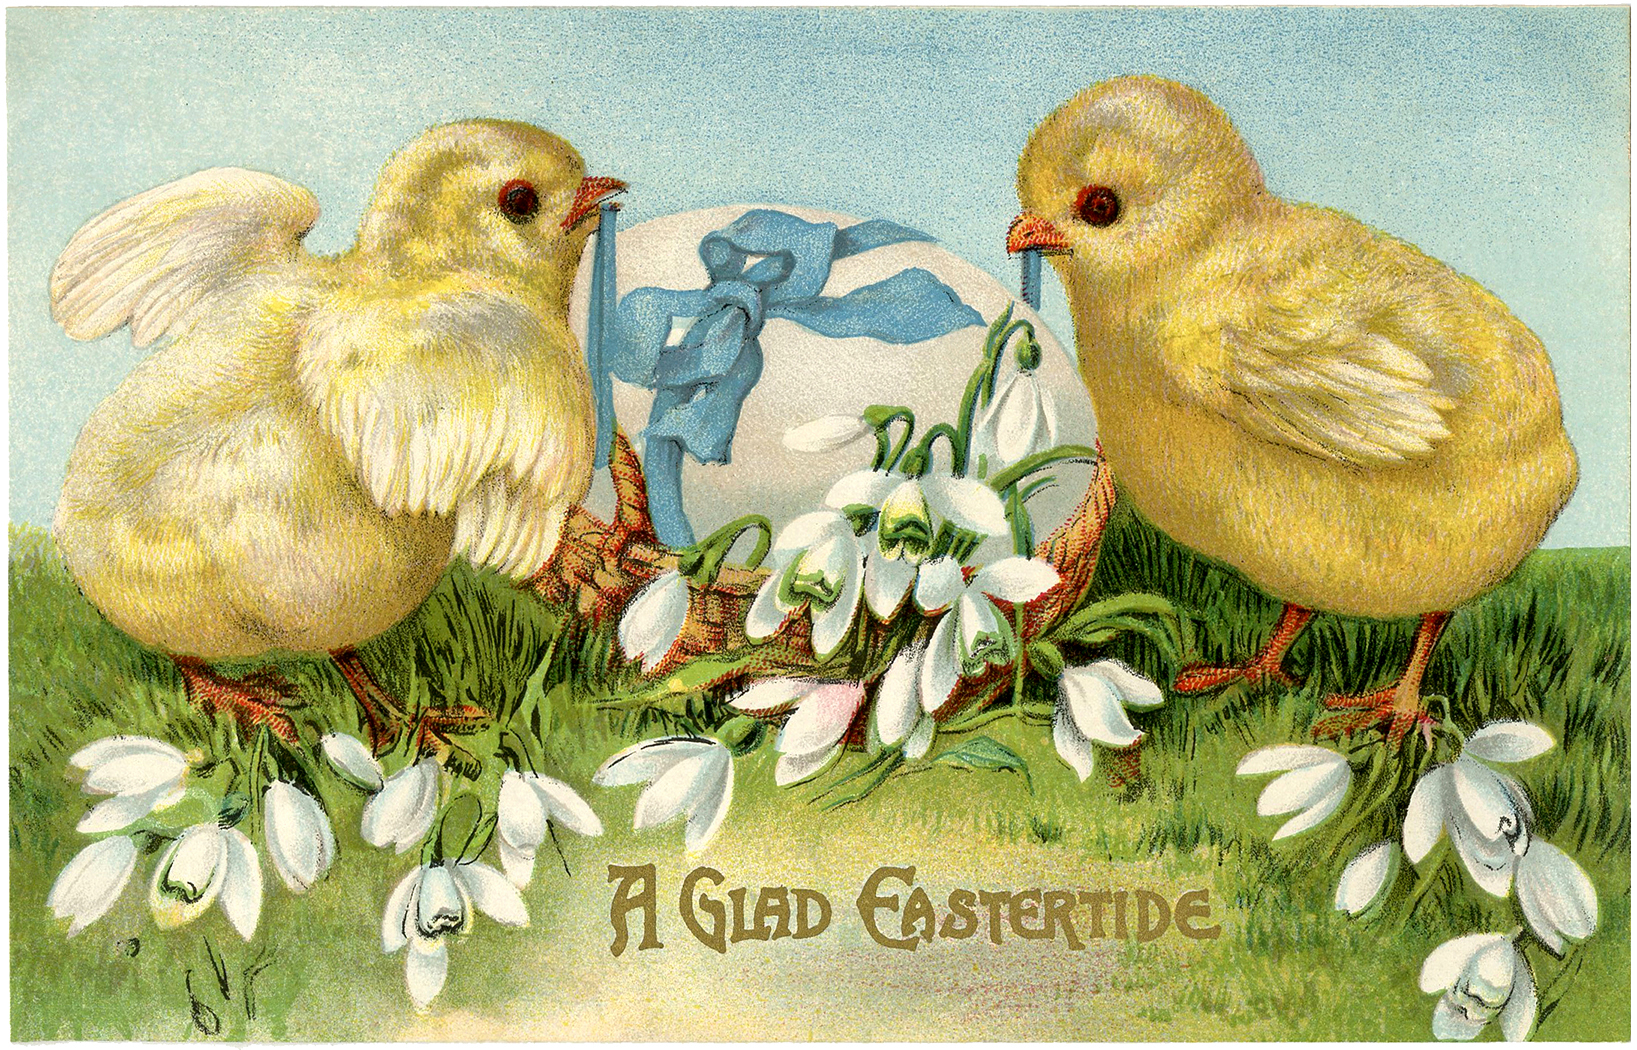 Free Printable Easter Greeting Cards - Azfreebies - Free Printable Easter Greeting Cards